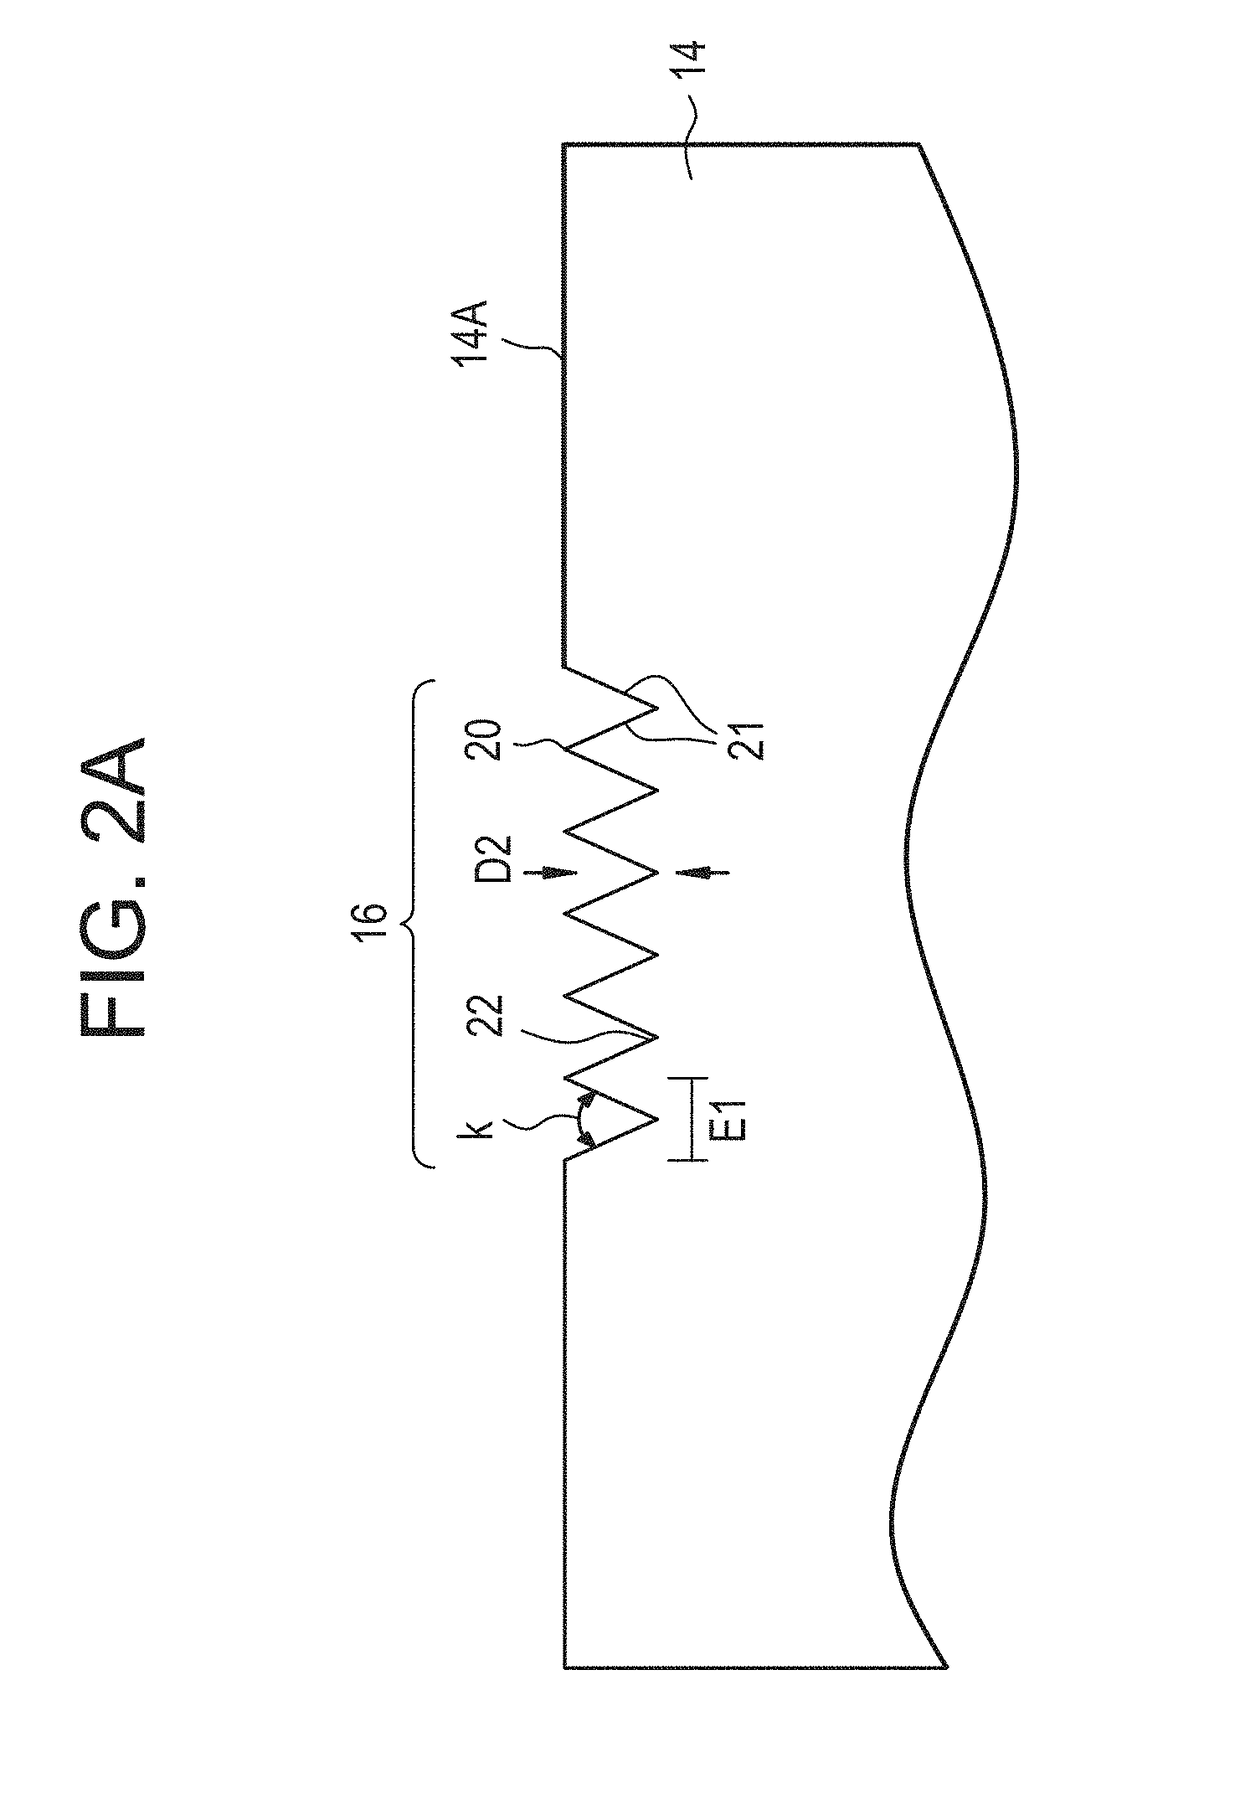 Method and apparatus for preparing a surface for bonding a material thereto